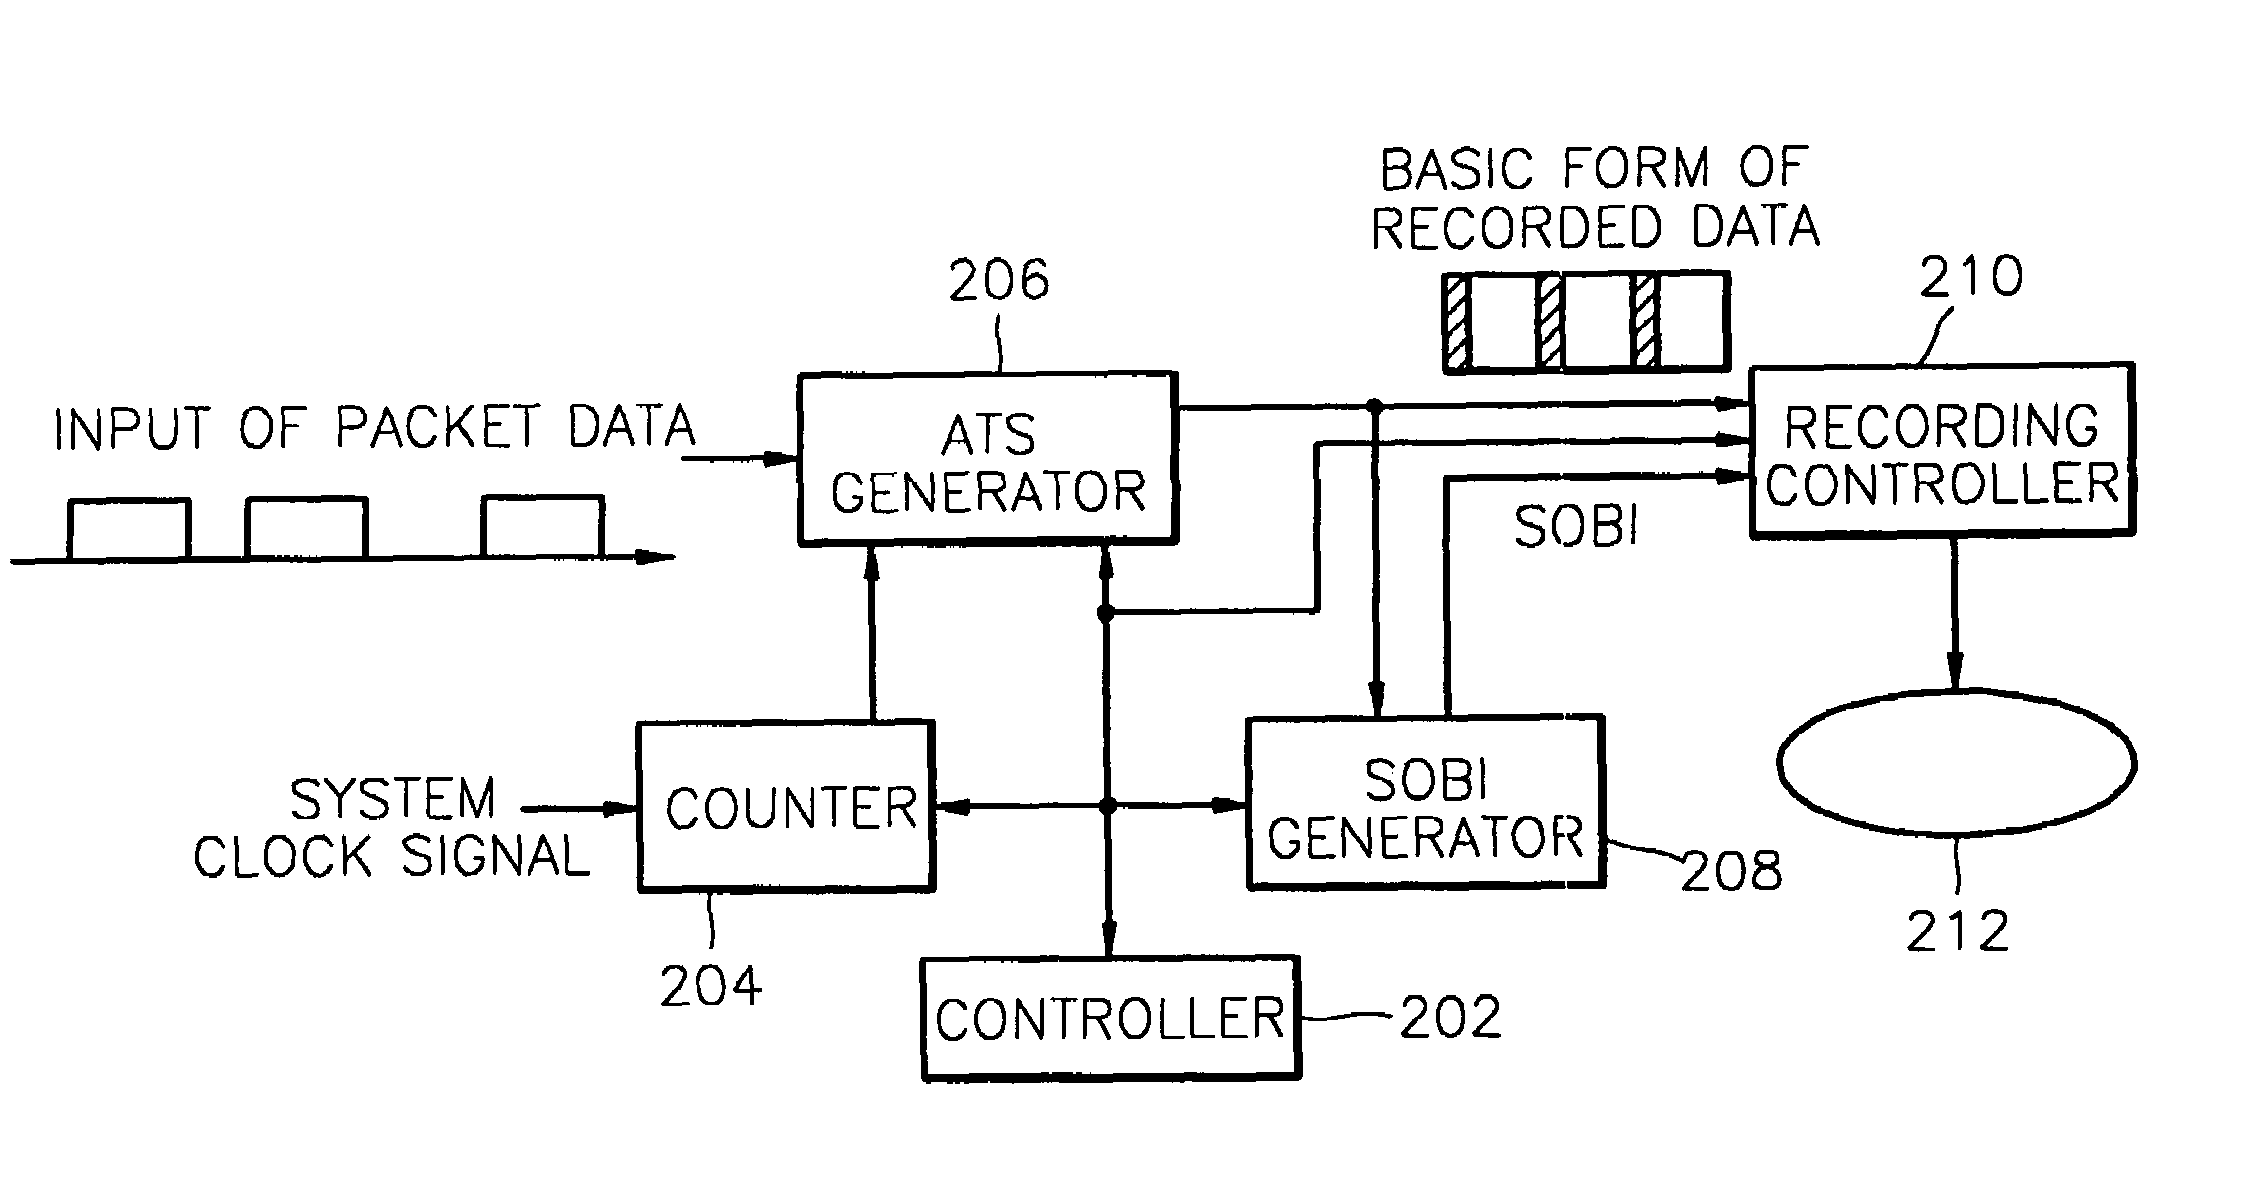 Method for generating additional information for guaranteeing seamless playback between data streams, recording medium storing the information, and recording, editing and/or playback apparatus using the same